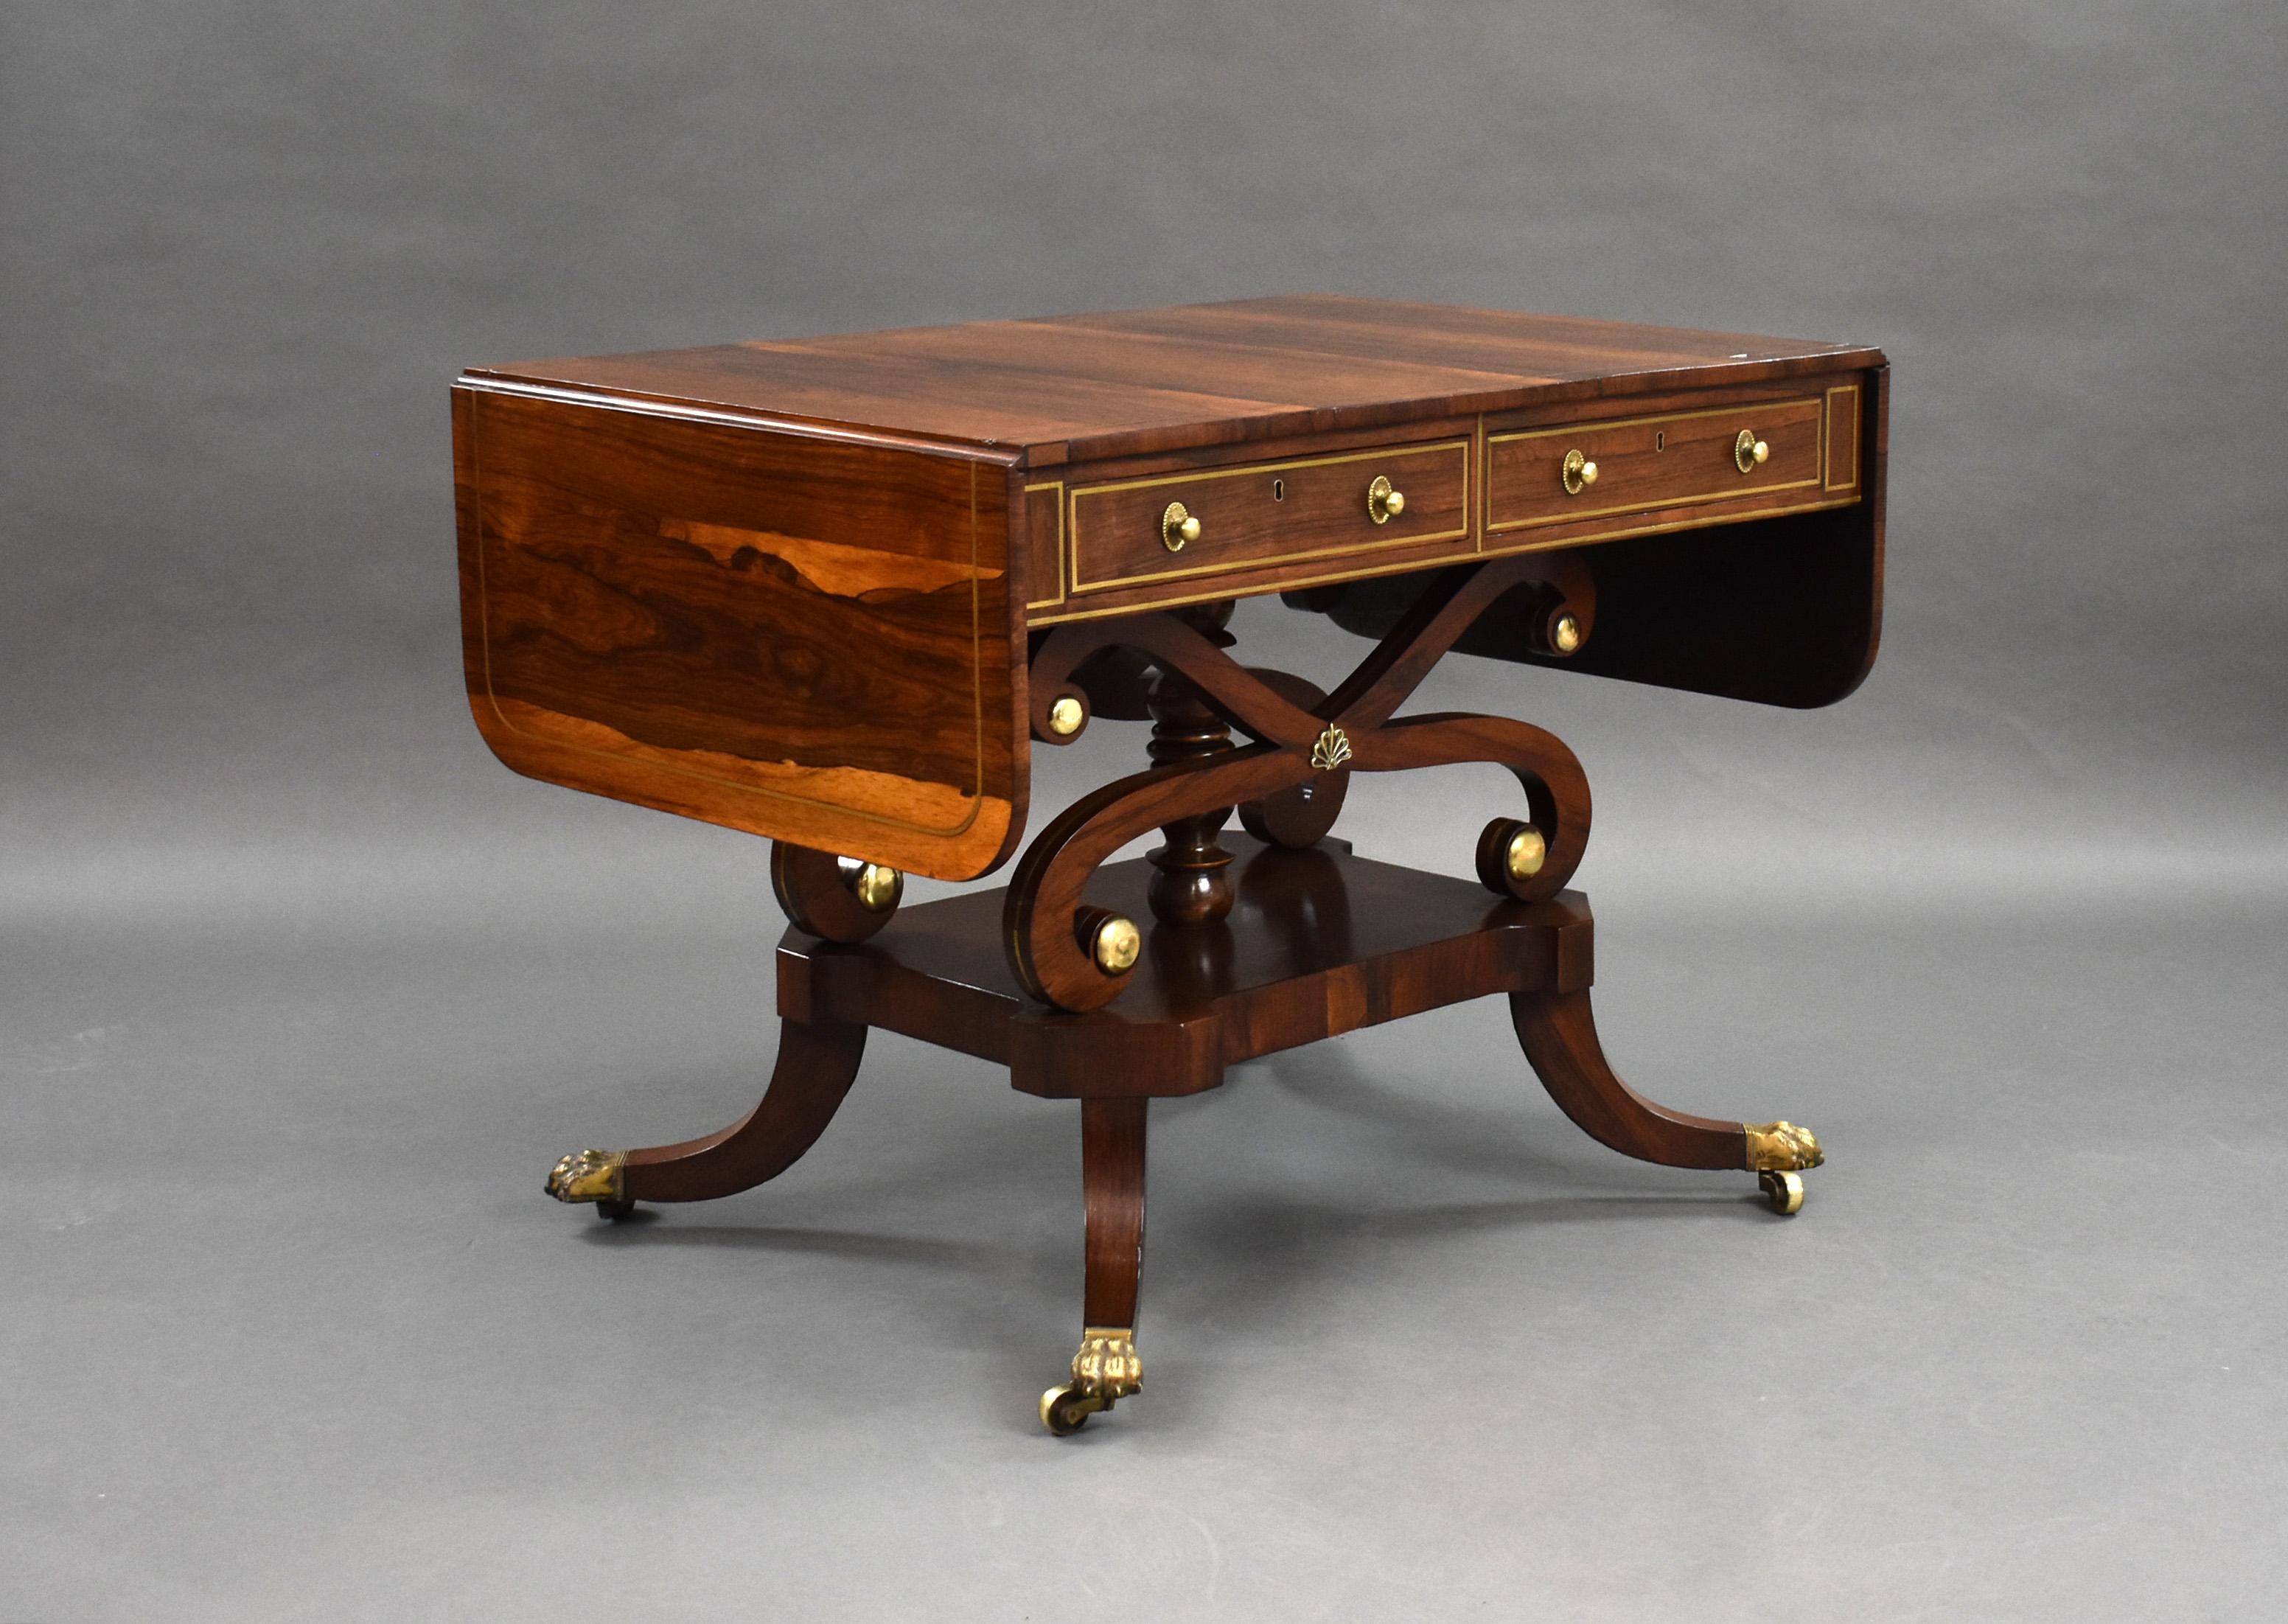 For sale is a fine quality Regency rosewood brass inlaid sofa table, the well figured top having two drop leaves, inlaid with brass line above two drawers to the front, with two faux drawers on the opposing side, each inlaid with brass line, above